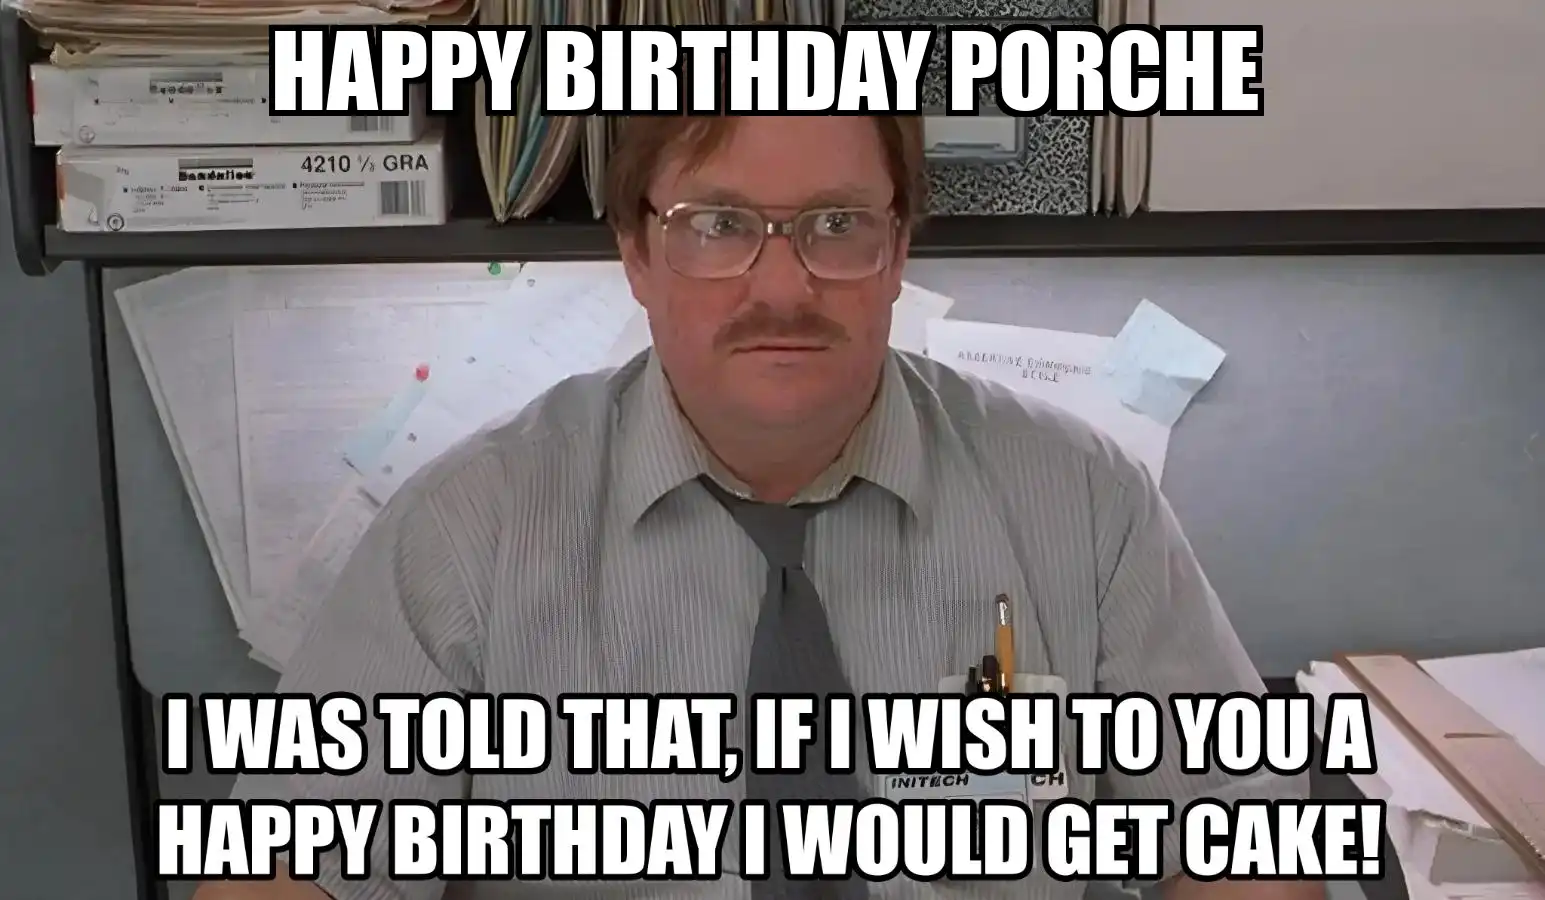 Happy Birthday Porche I Would Get A Cake Meme